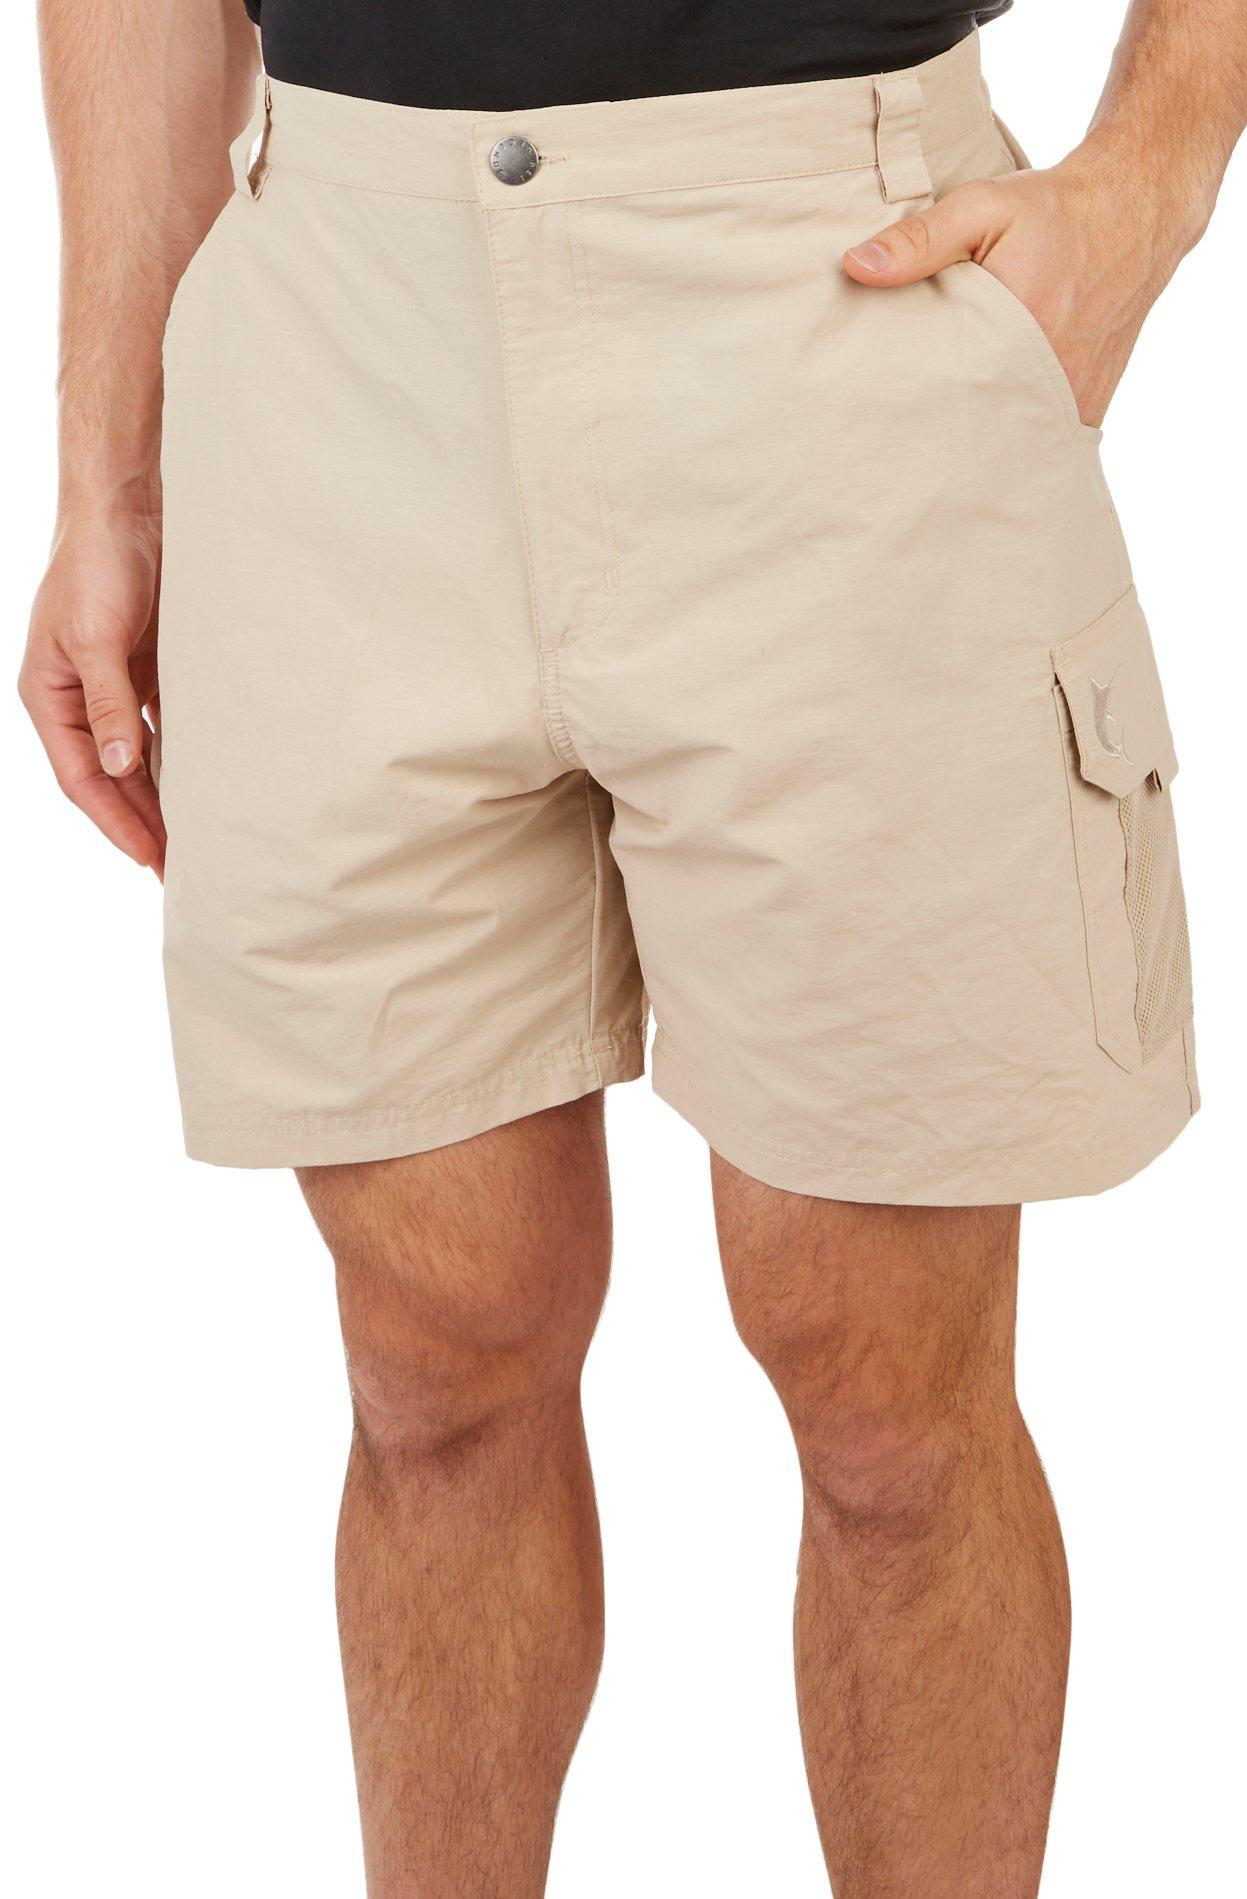 Reel Legends Mens Solid Tarpon Quick Dry 7 in. Cargo Shorts - Khaki - Small